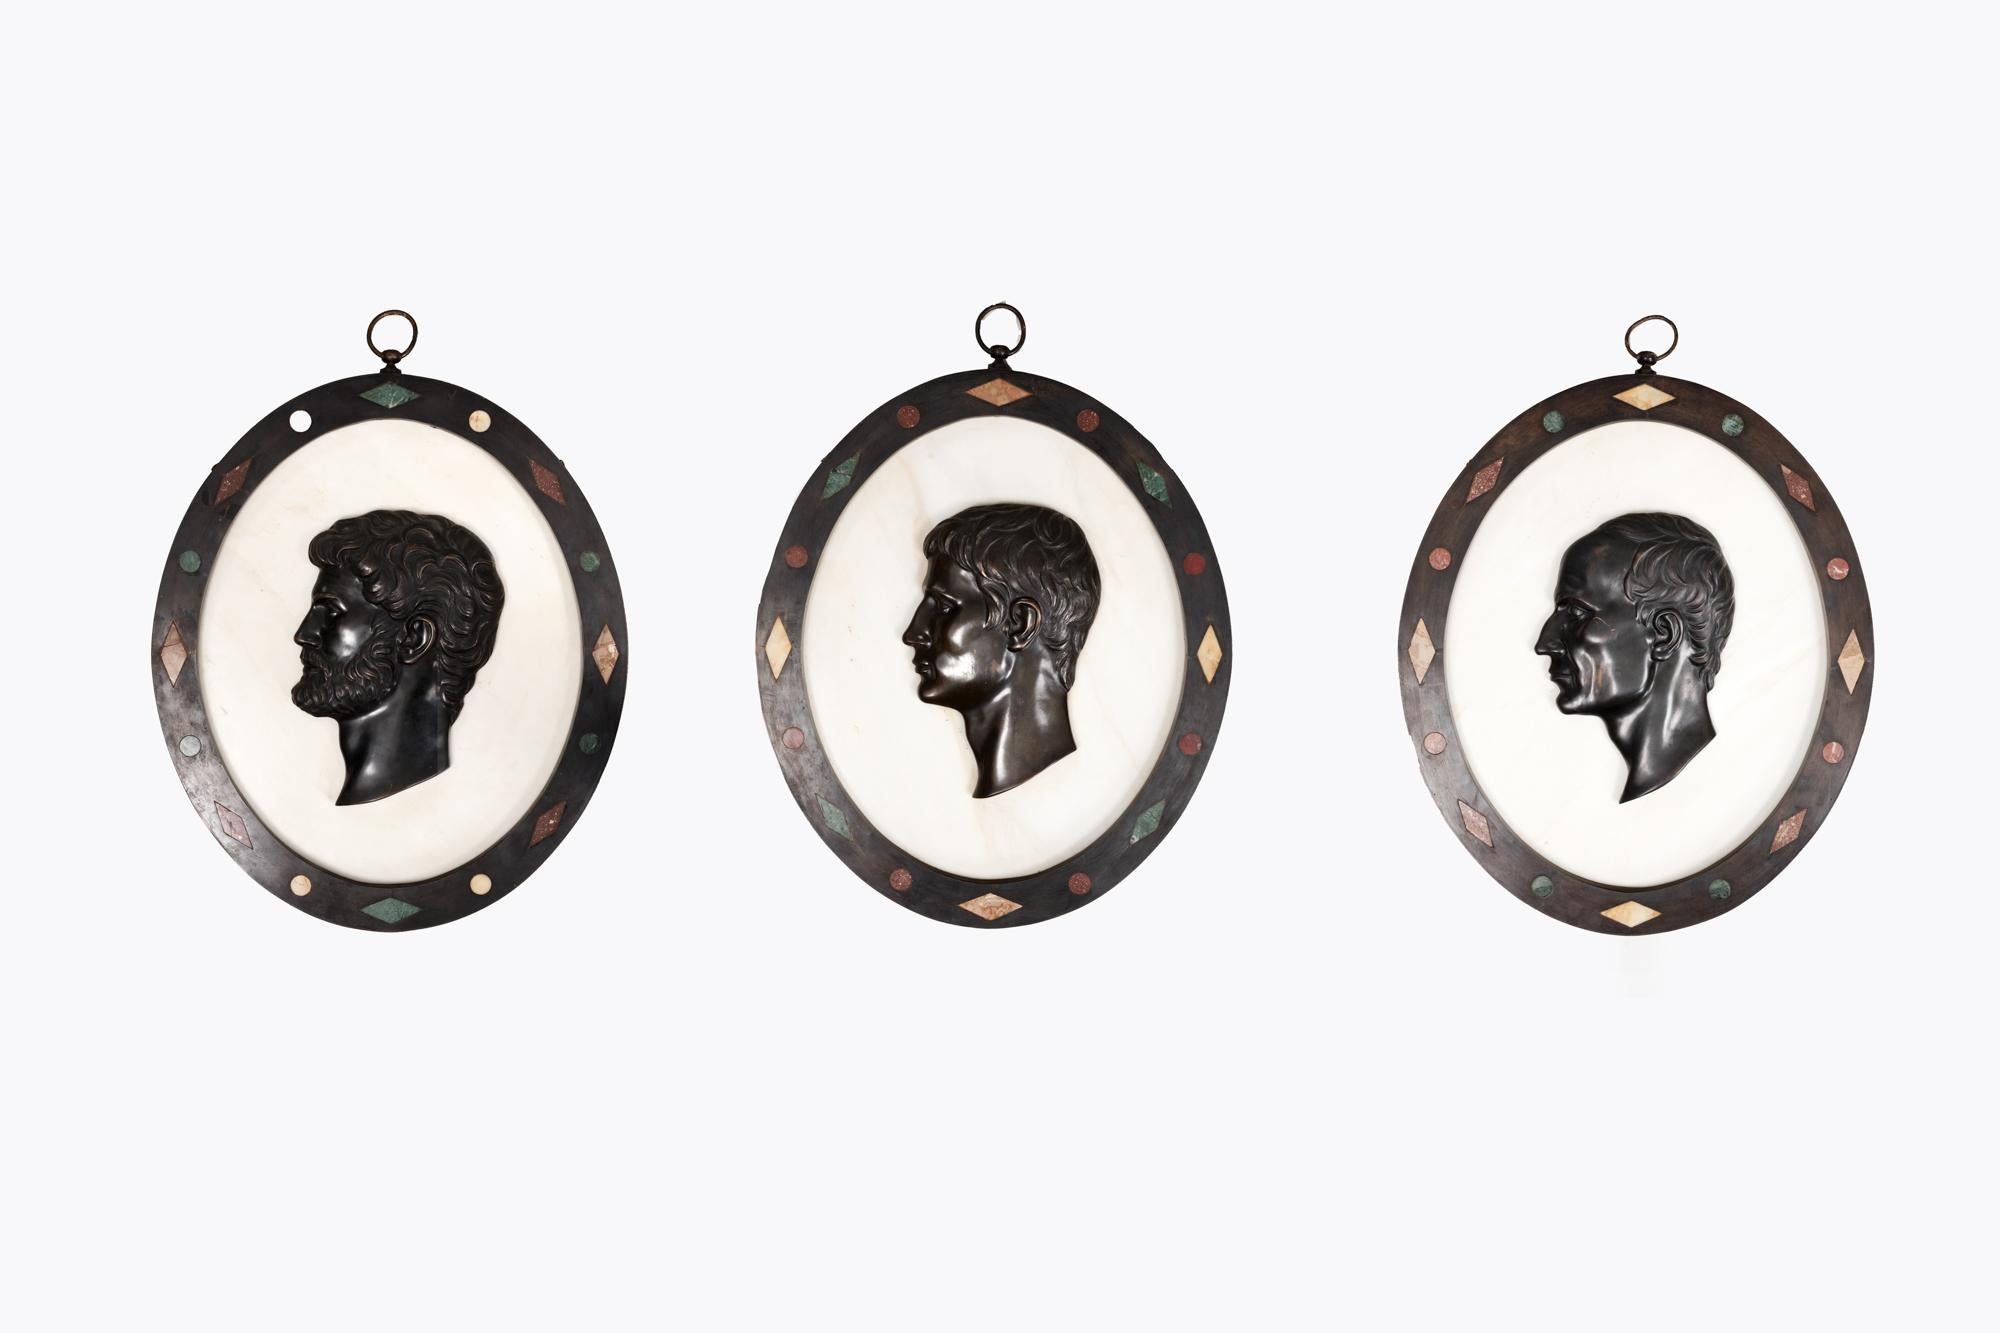 Rare 19th Century set of three unusually large Grand Tour oval Carrara marble plaques featuring relief profiles in bronze of Julius Caesar, Caesar Augustus and Hadrian. All three are enclosed by specimen samples of precious stone inset in black